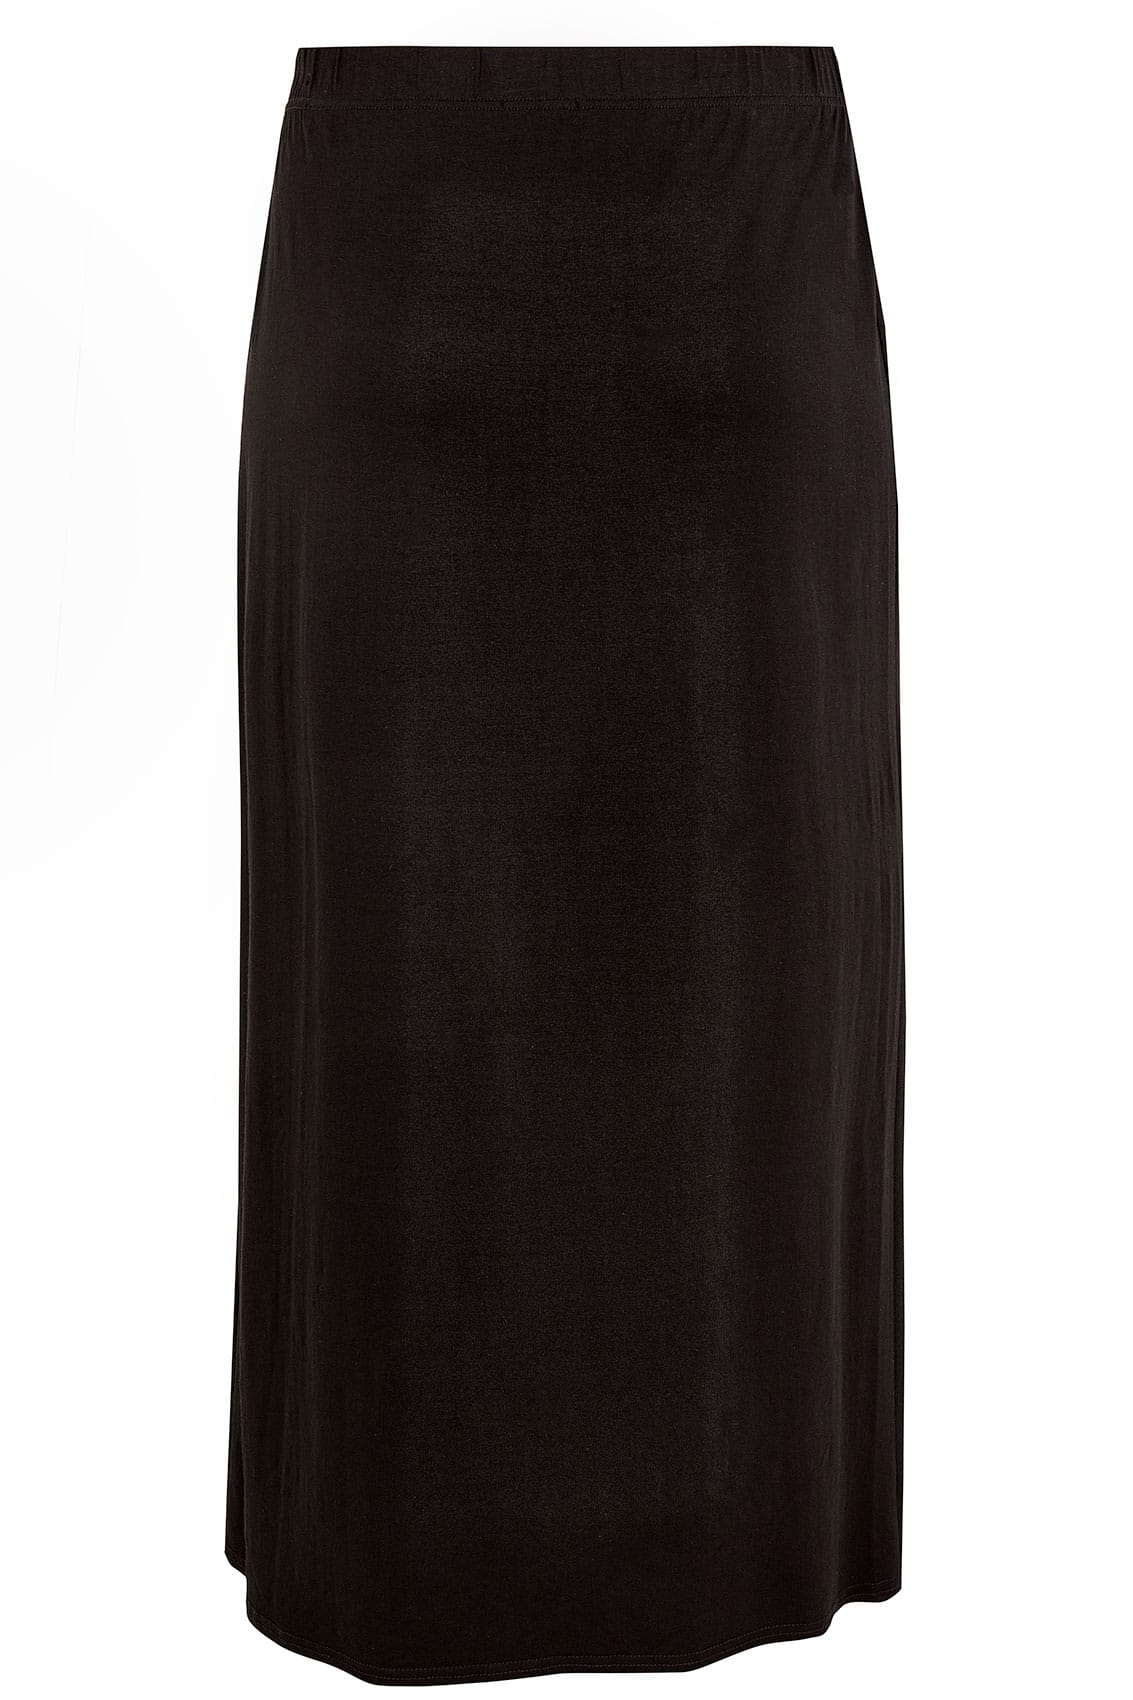 Black Jersey Skirt - Yours Size 22 for sale online